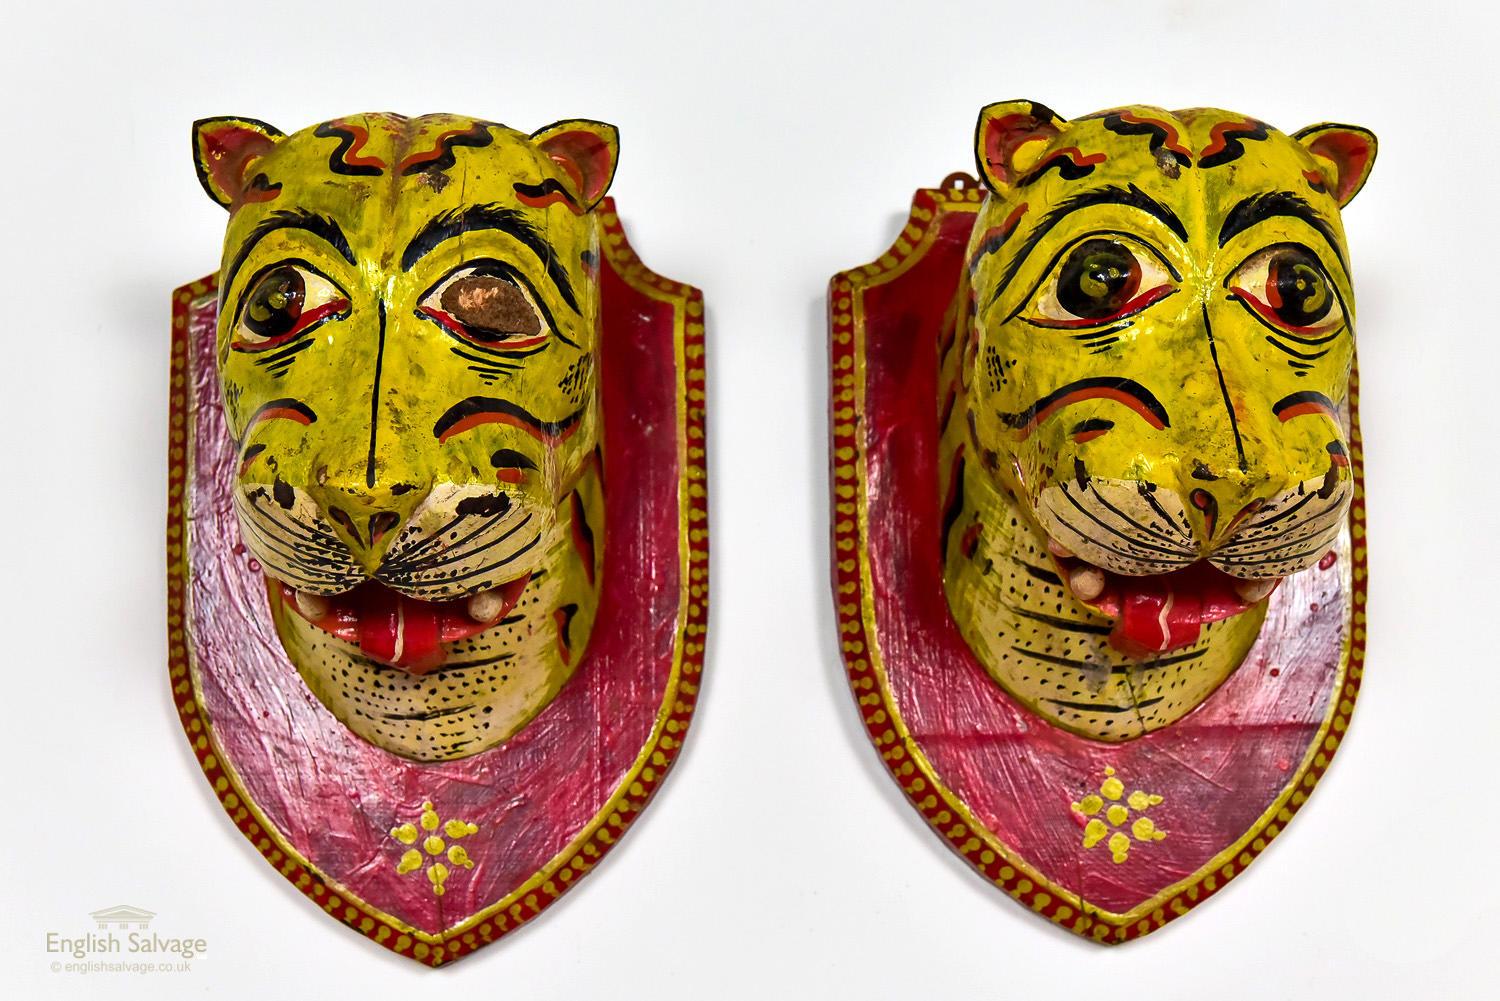 Two uniquely carved tiger heads, brightly painted and mounted on carved shields to resemble trophies. They both have a hanging wire connecting to two lugs to support them. One has some damage to its eye and both have some chips and cracks as